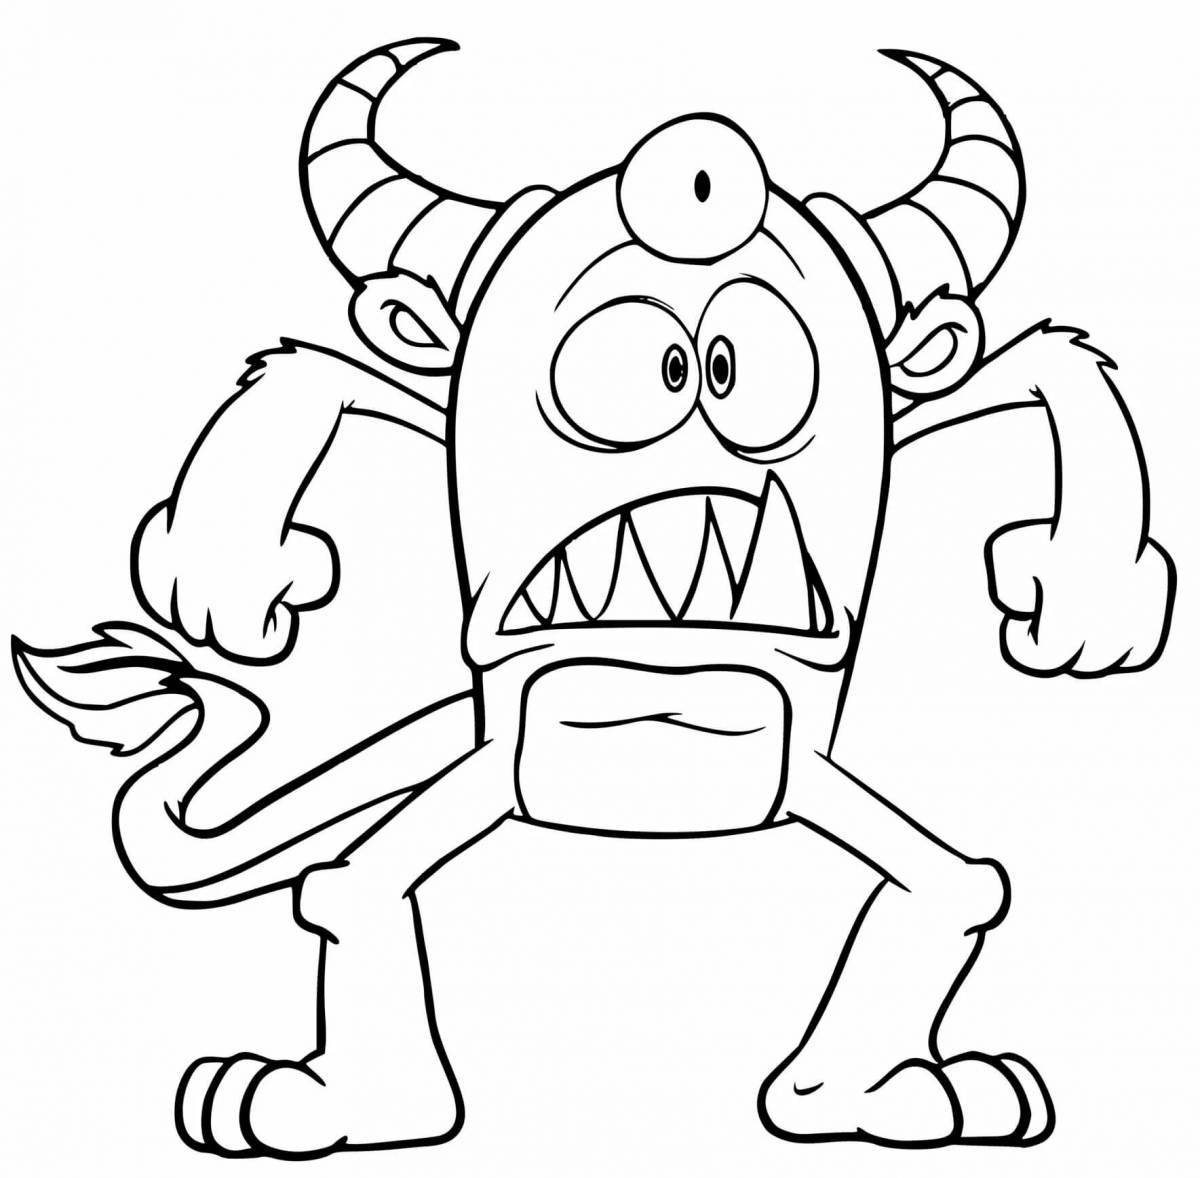 Playful monster boys coloring page